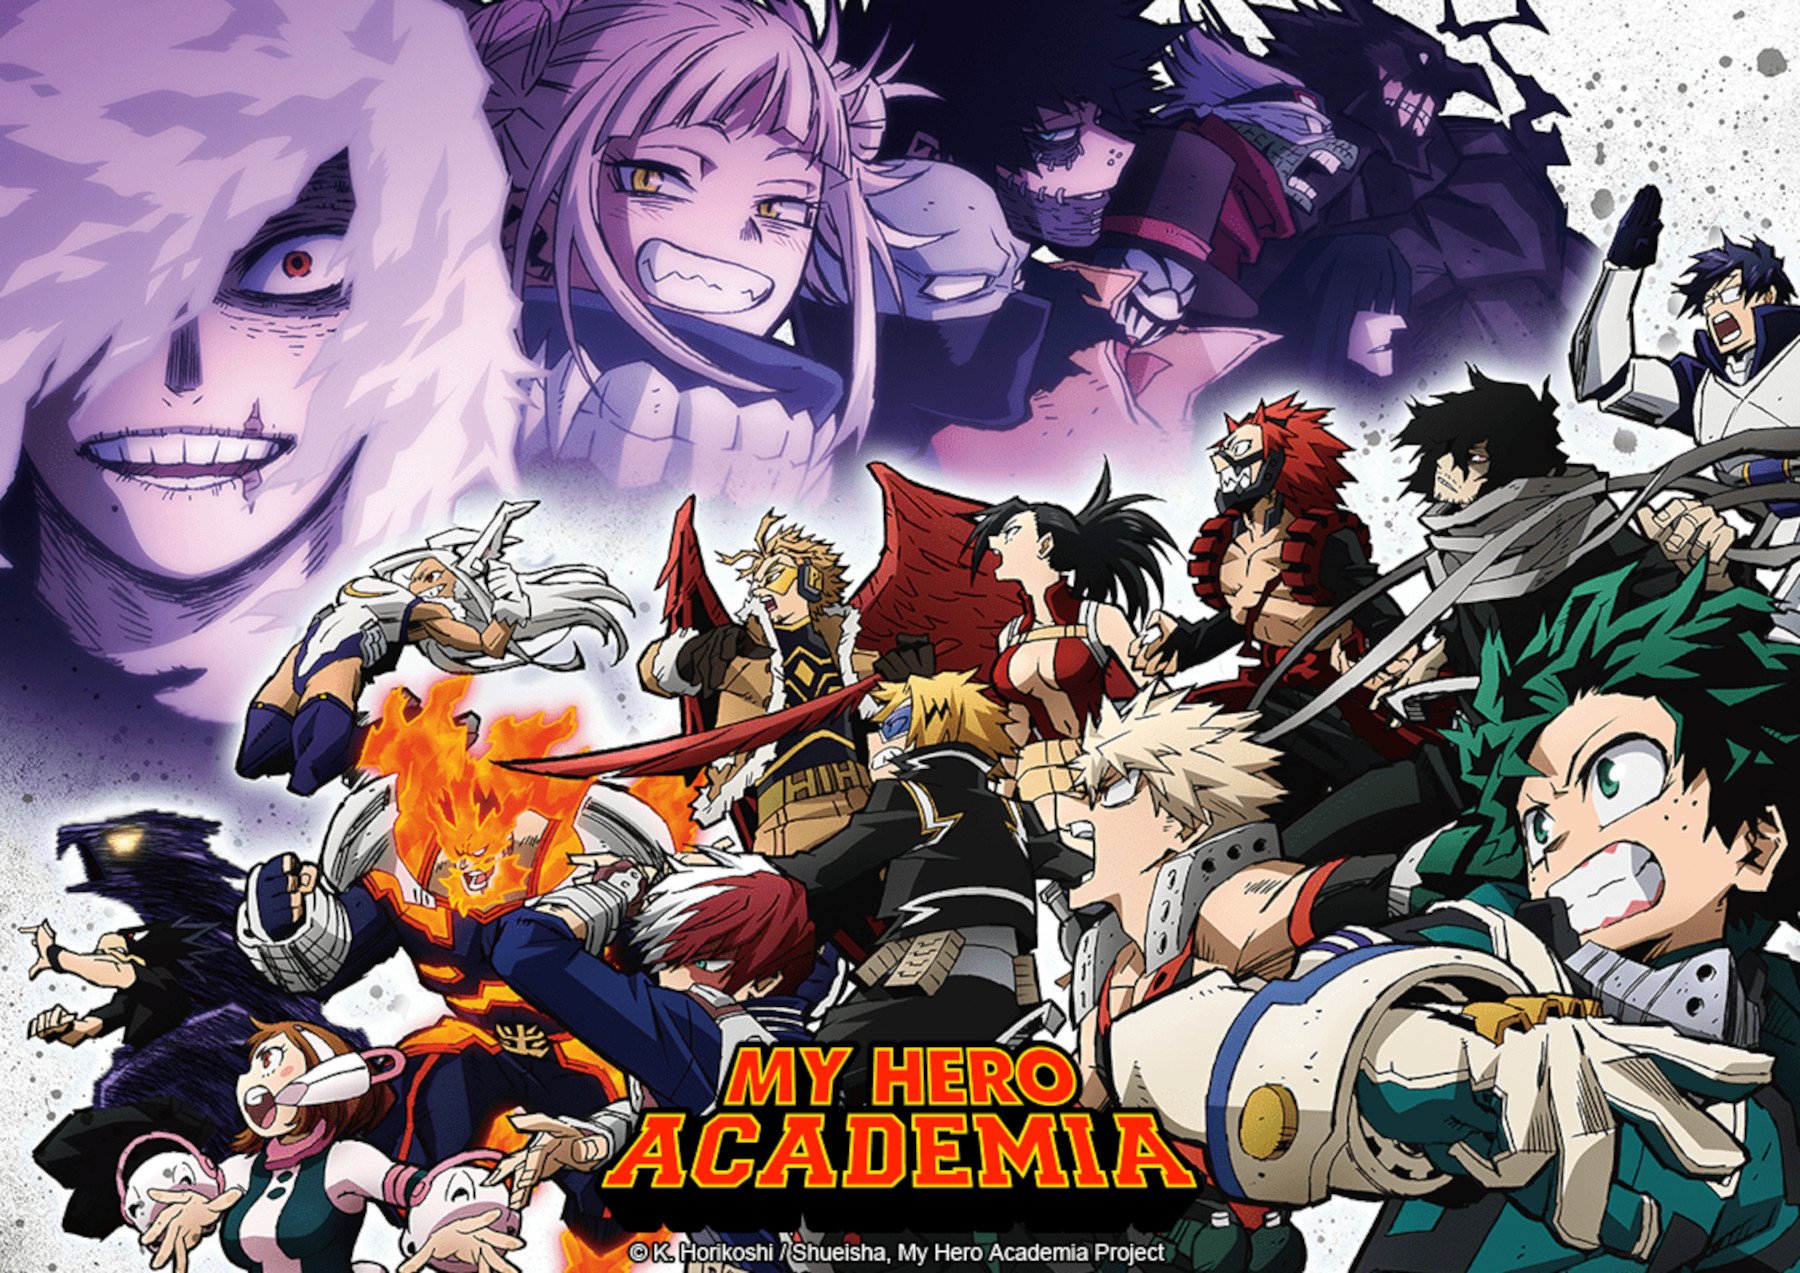 Key art for 'My Hero Academia' Season 6 for our article about what time it comes out on Crunchyroll. It features Class 1-A and the Pro Heroes ready for battle, with the villains looming over them.